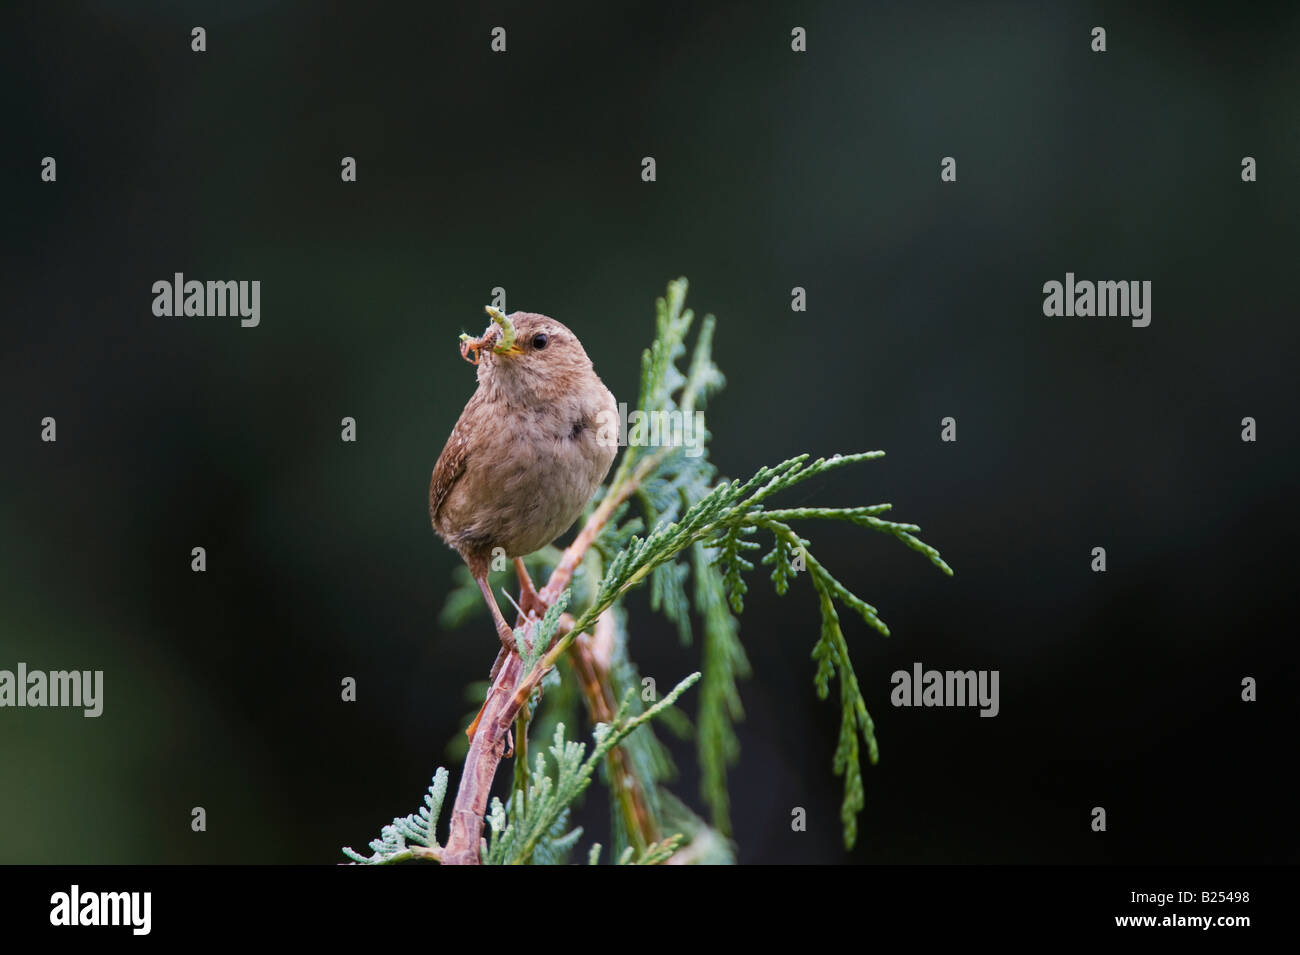 Troglodytes troglodytes. Wren with a spider and caterpillar in its beak perched on a tree Stock Photo